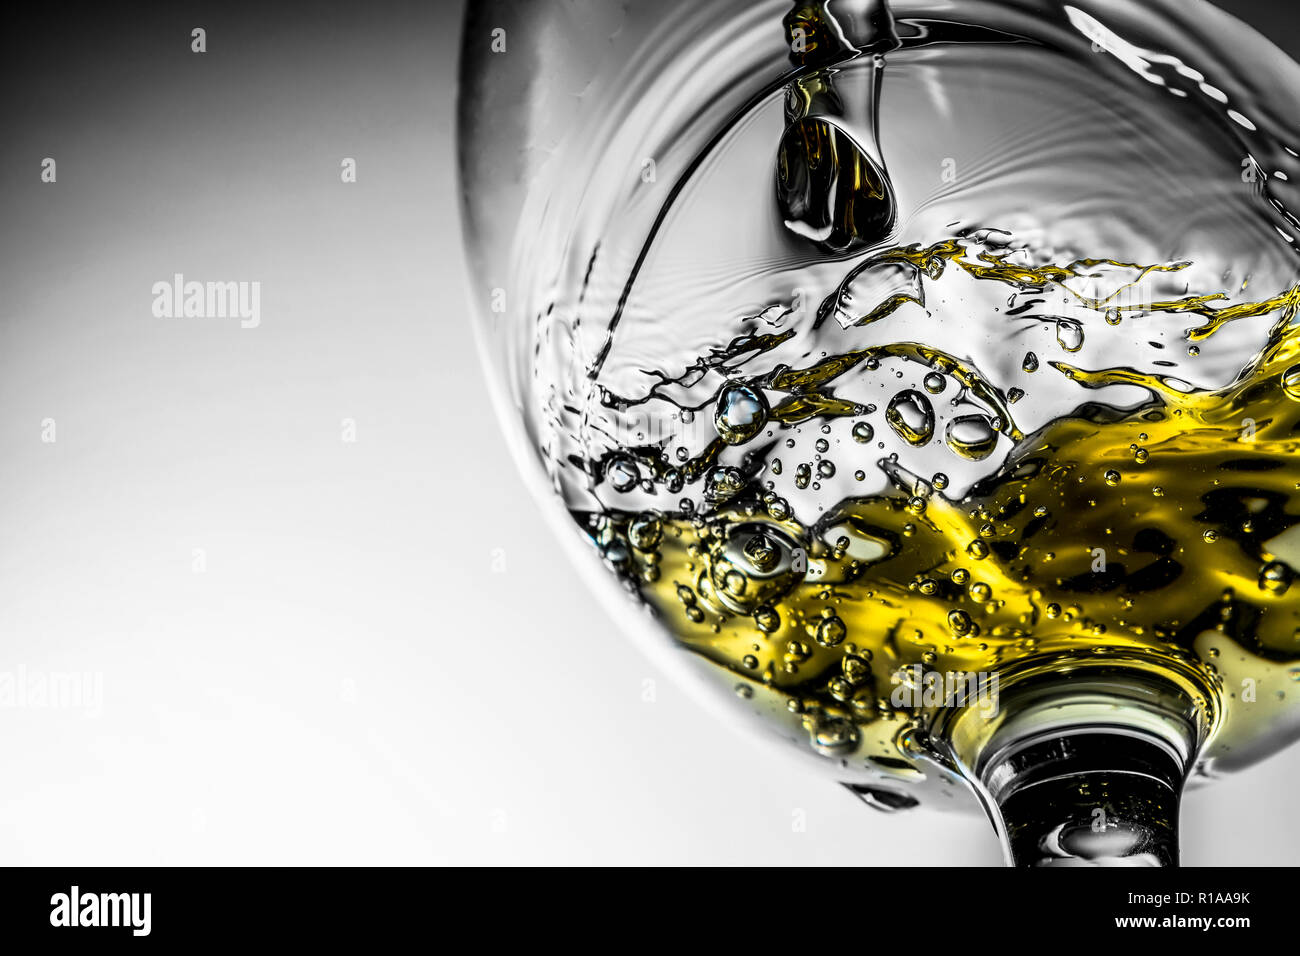 Stream of white wine pouring into a glass, white wine splash close-up on a grey background. Black and white photo with color of wine. Stock Photo